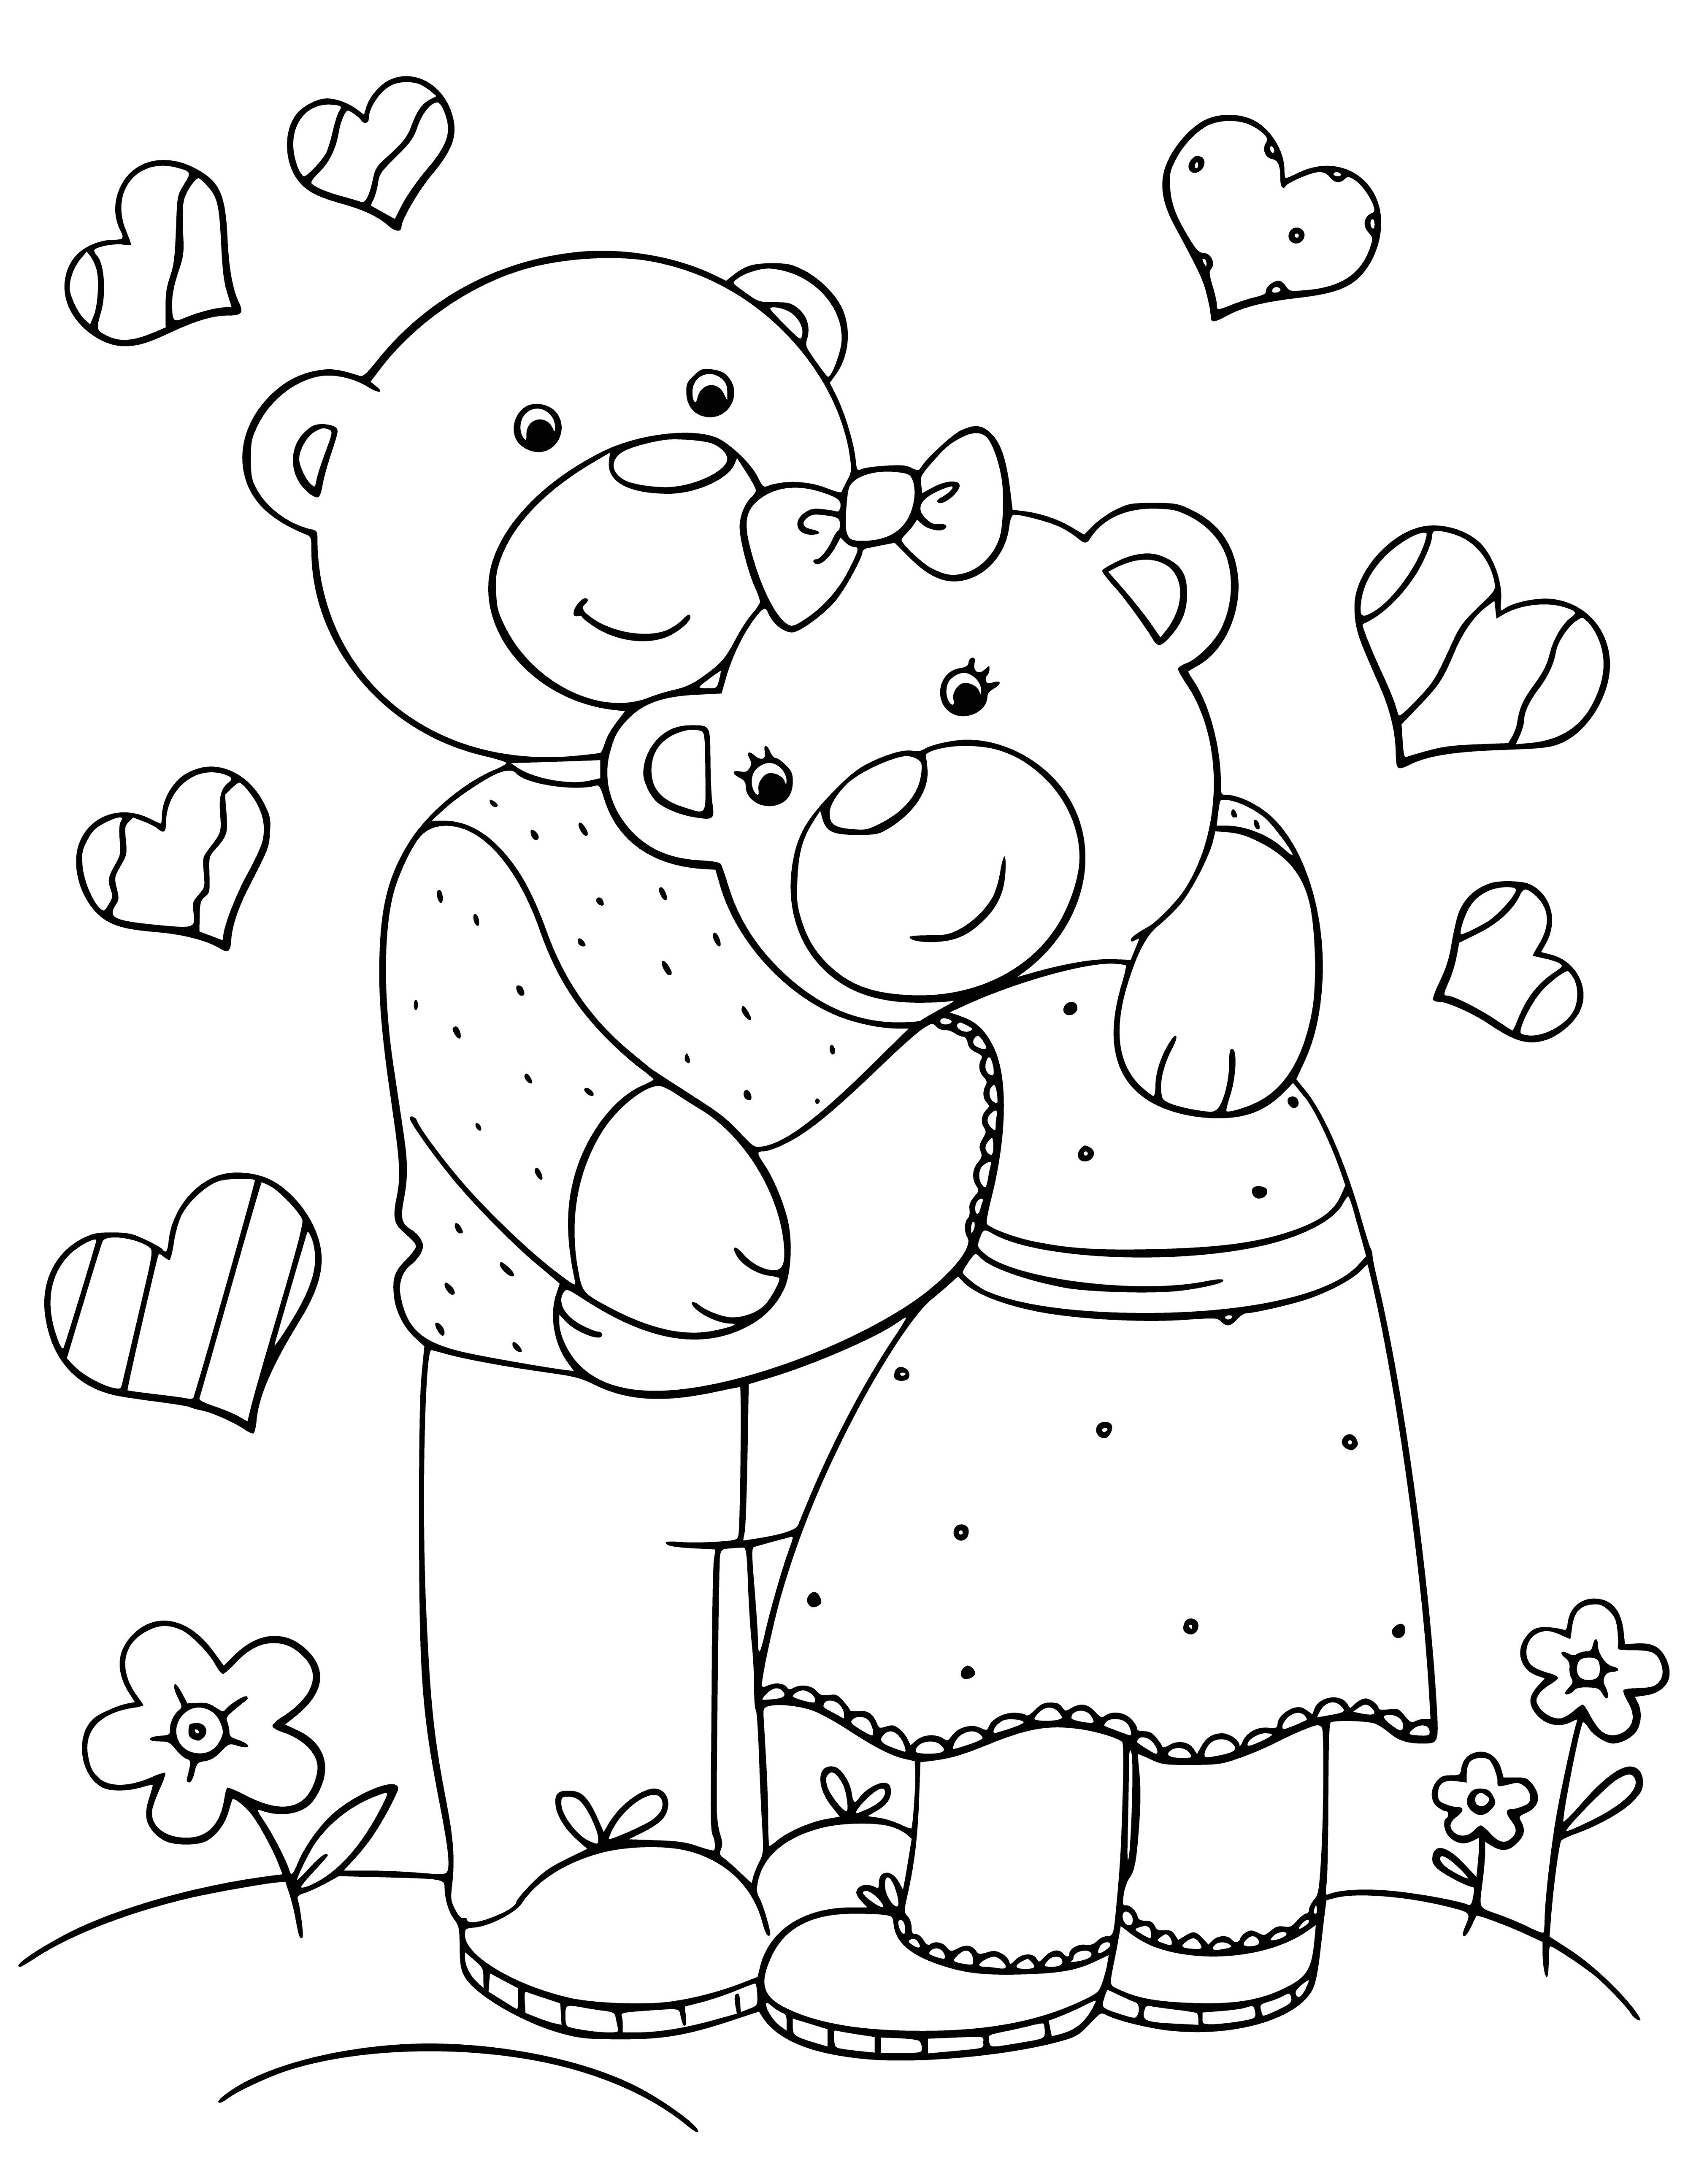 Family of bears coloring page